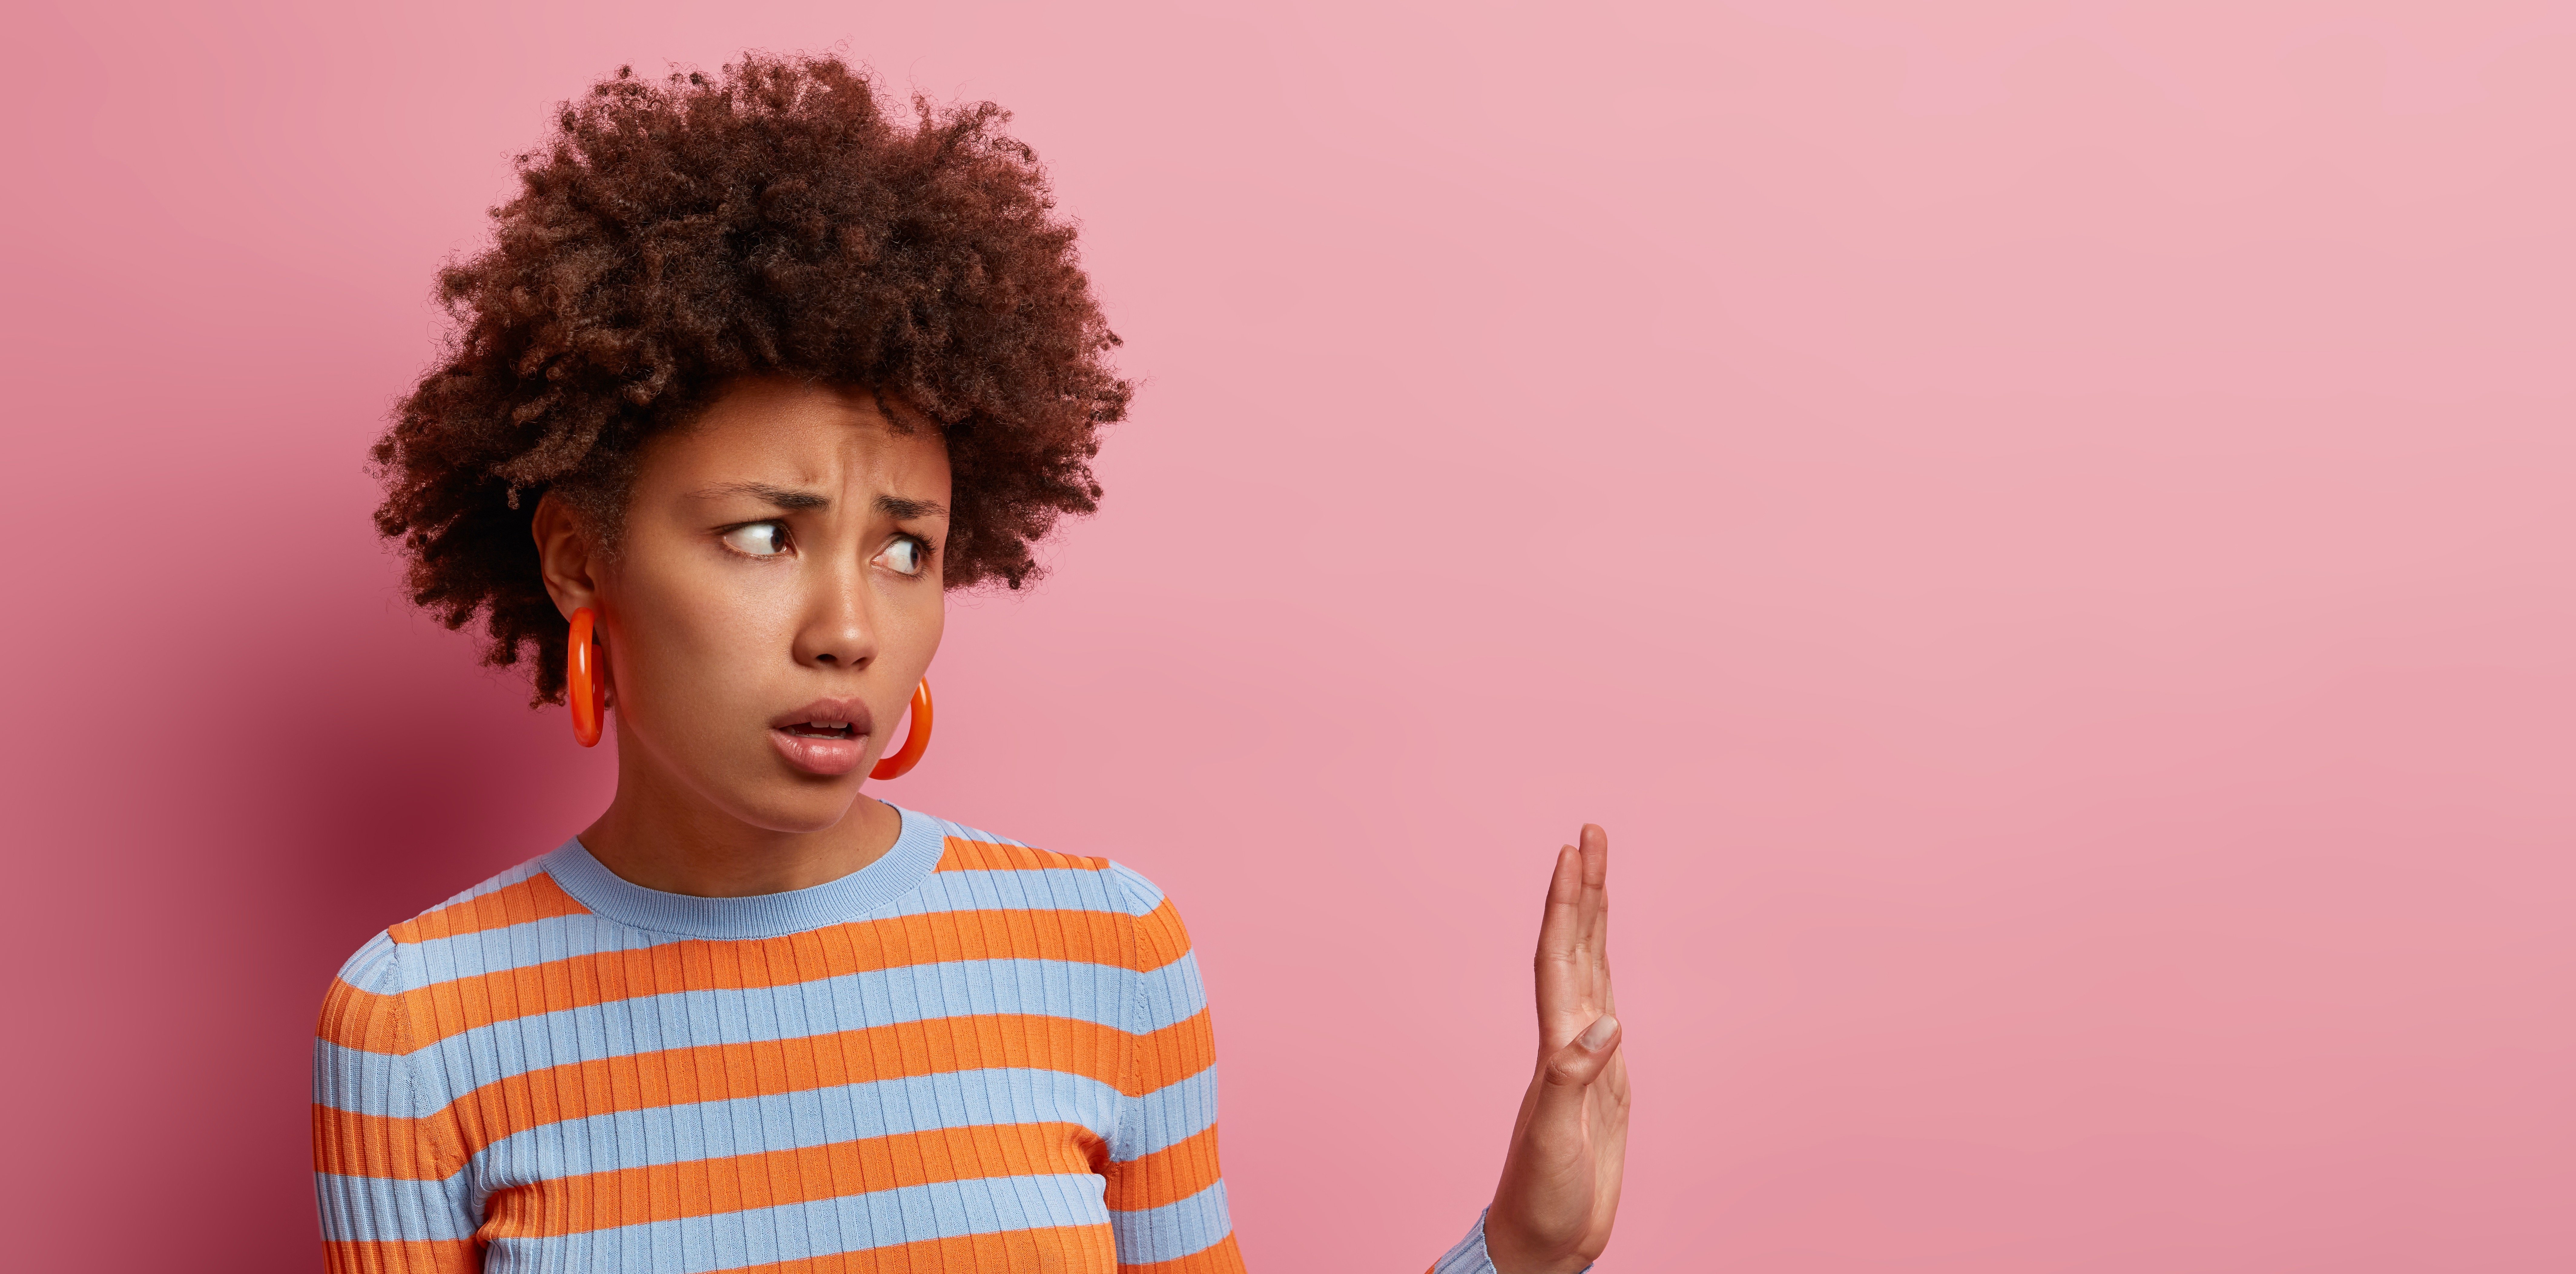 discontent-african-american-woman-keeps-palm-refusal-gesture-says-stays-away-from-me-come-closer-avoids-crowded-places-grimaces-disappointed-isolated-pink-wall-empty-space